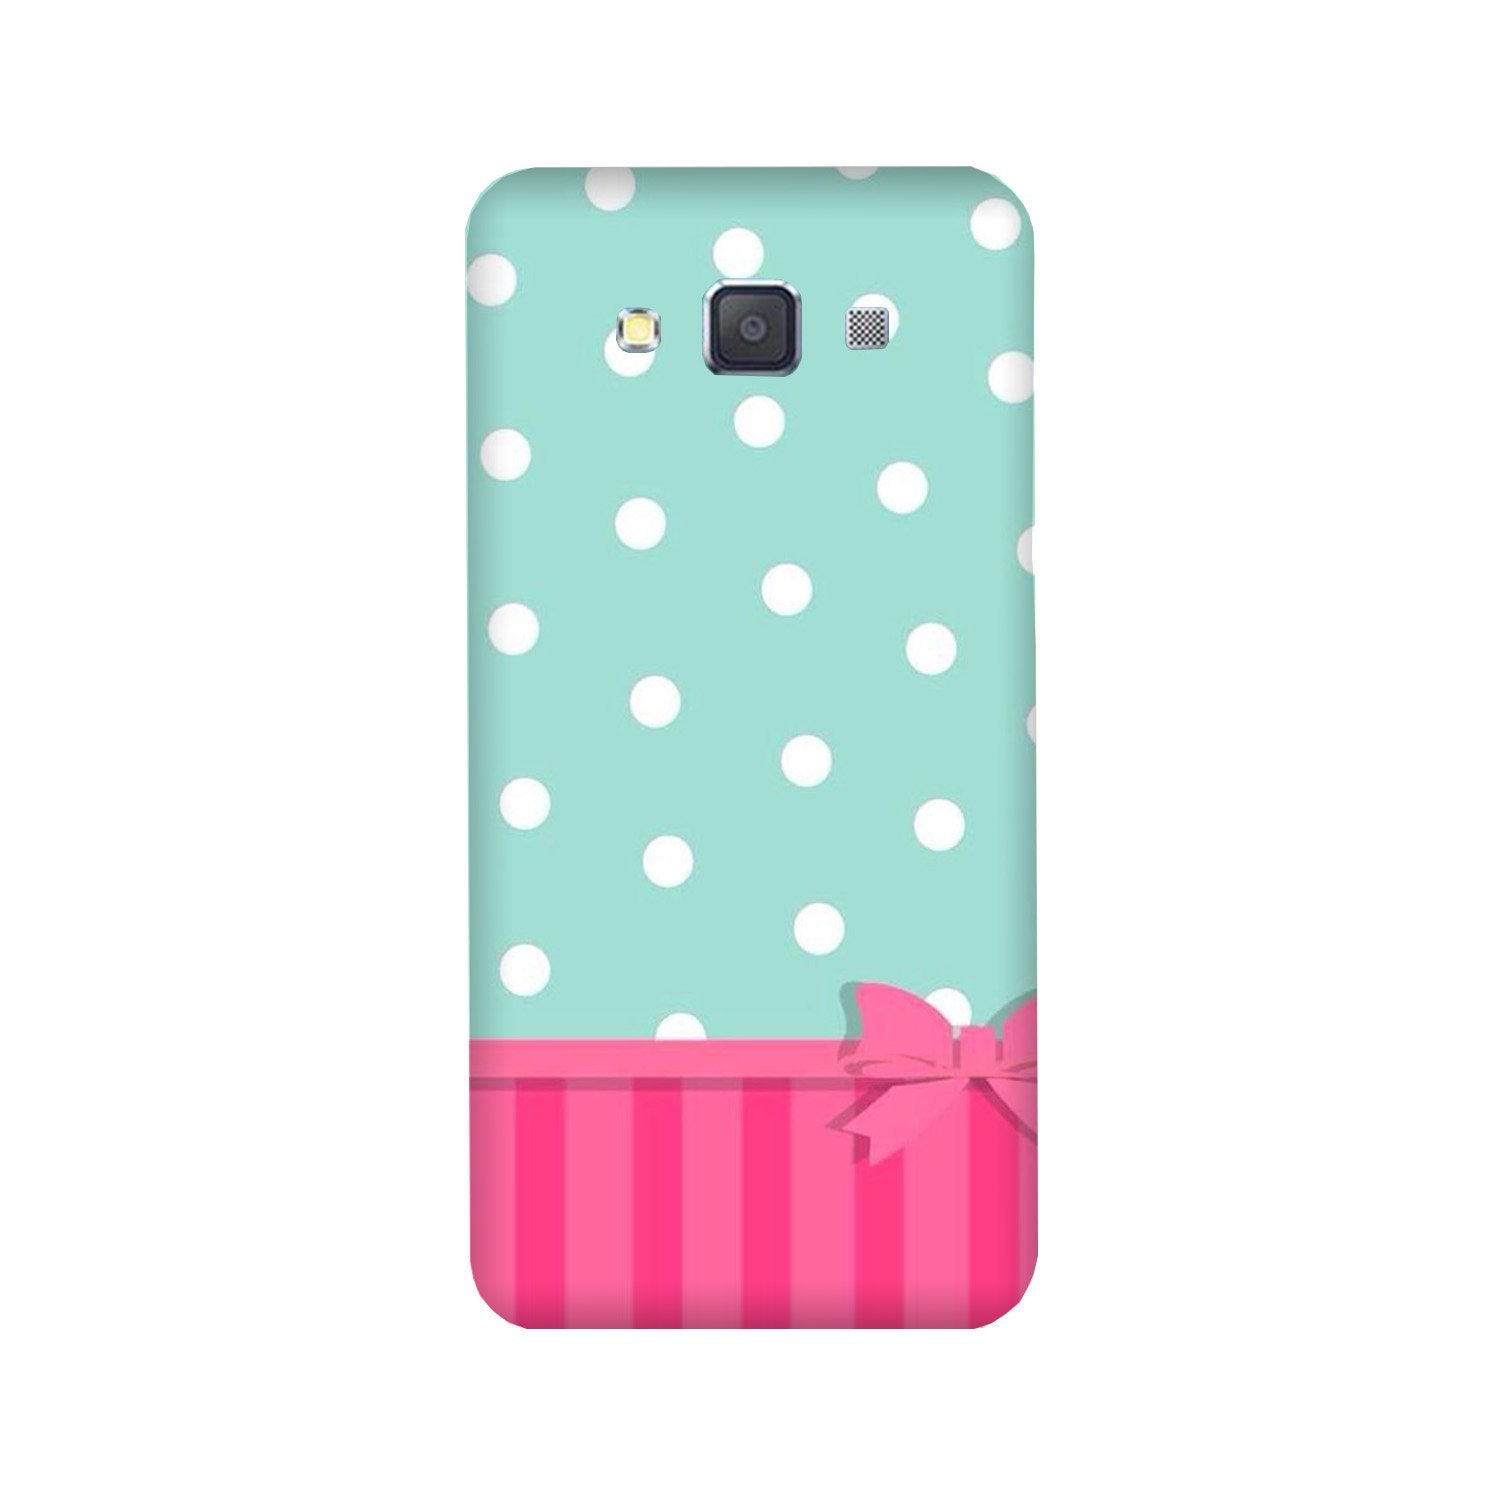 Gift Wrap Case for Galaxy J7 (2016)